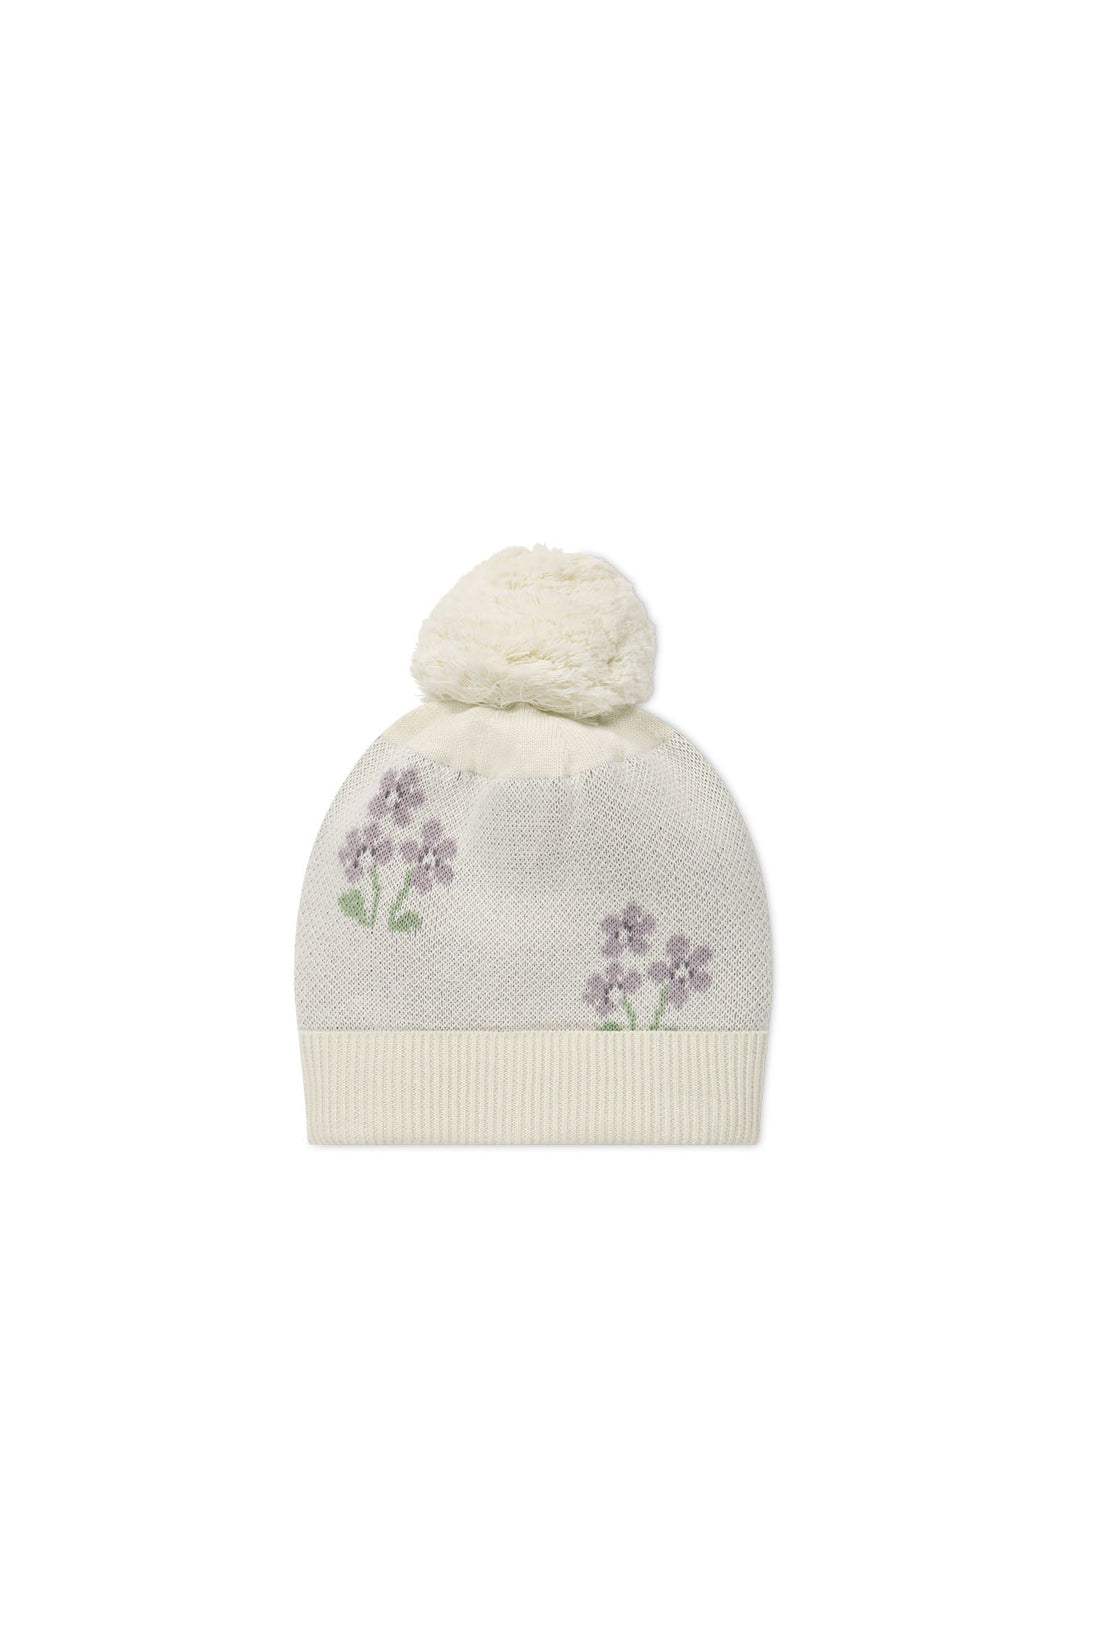 Addison Beanie - Cloud Meadow Flowers Placement Childrens Hat from Jamie Kay NZ